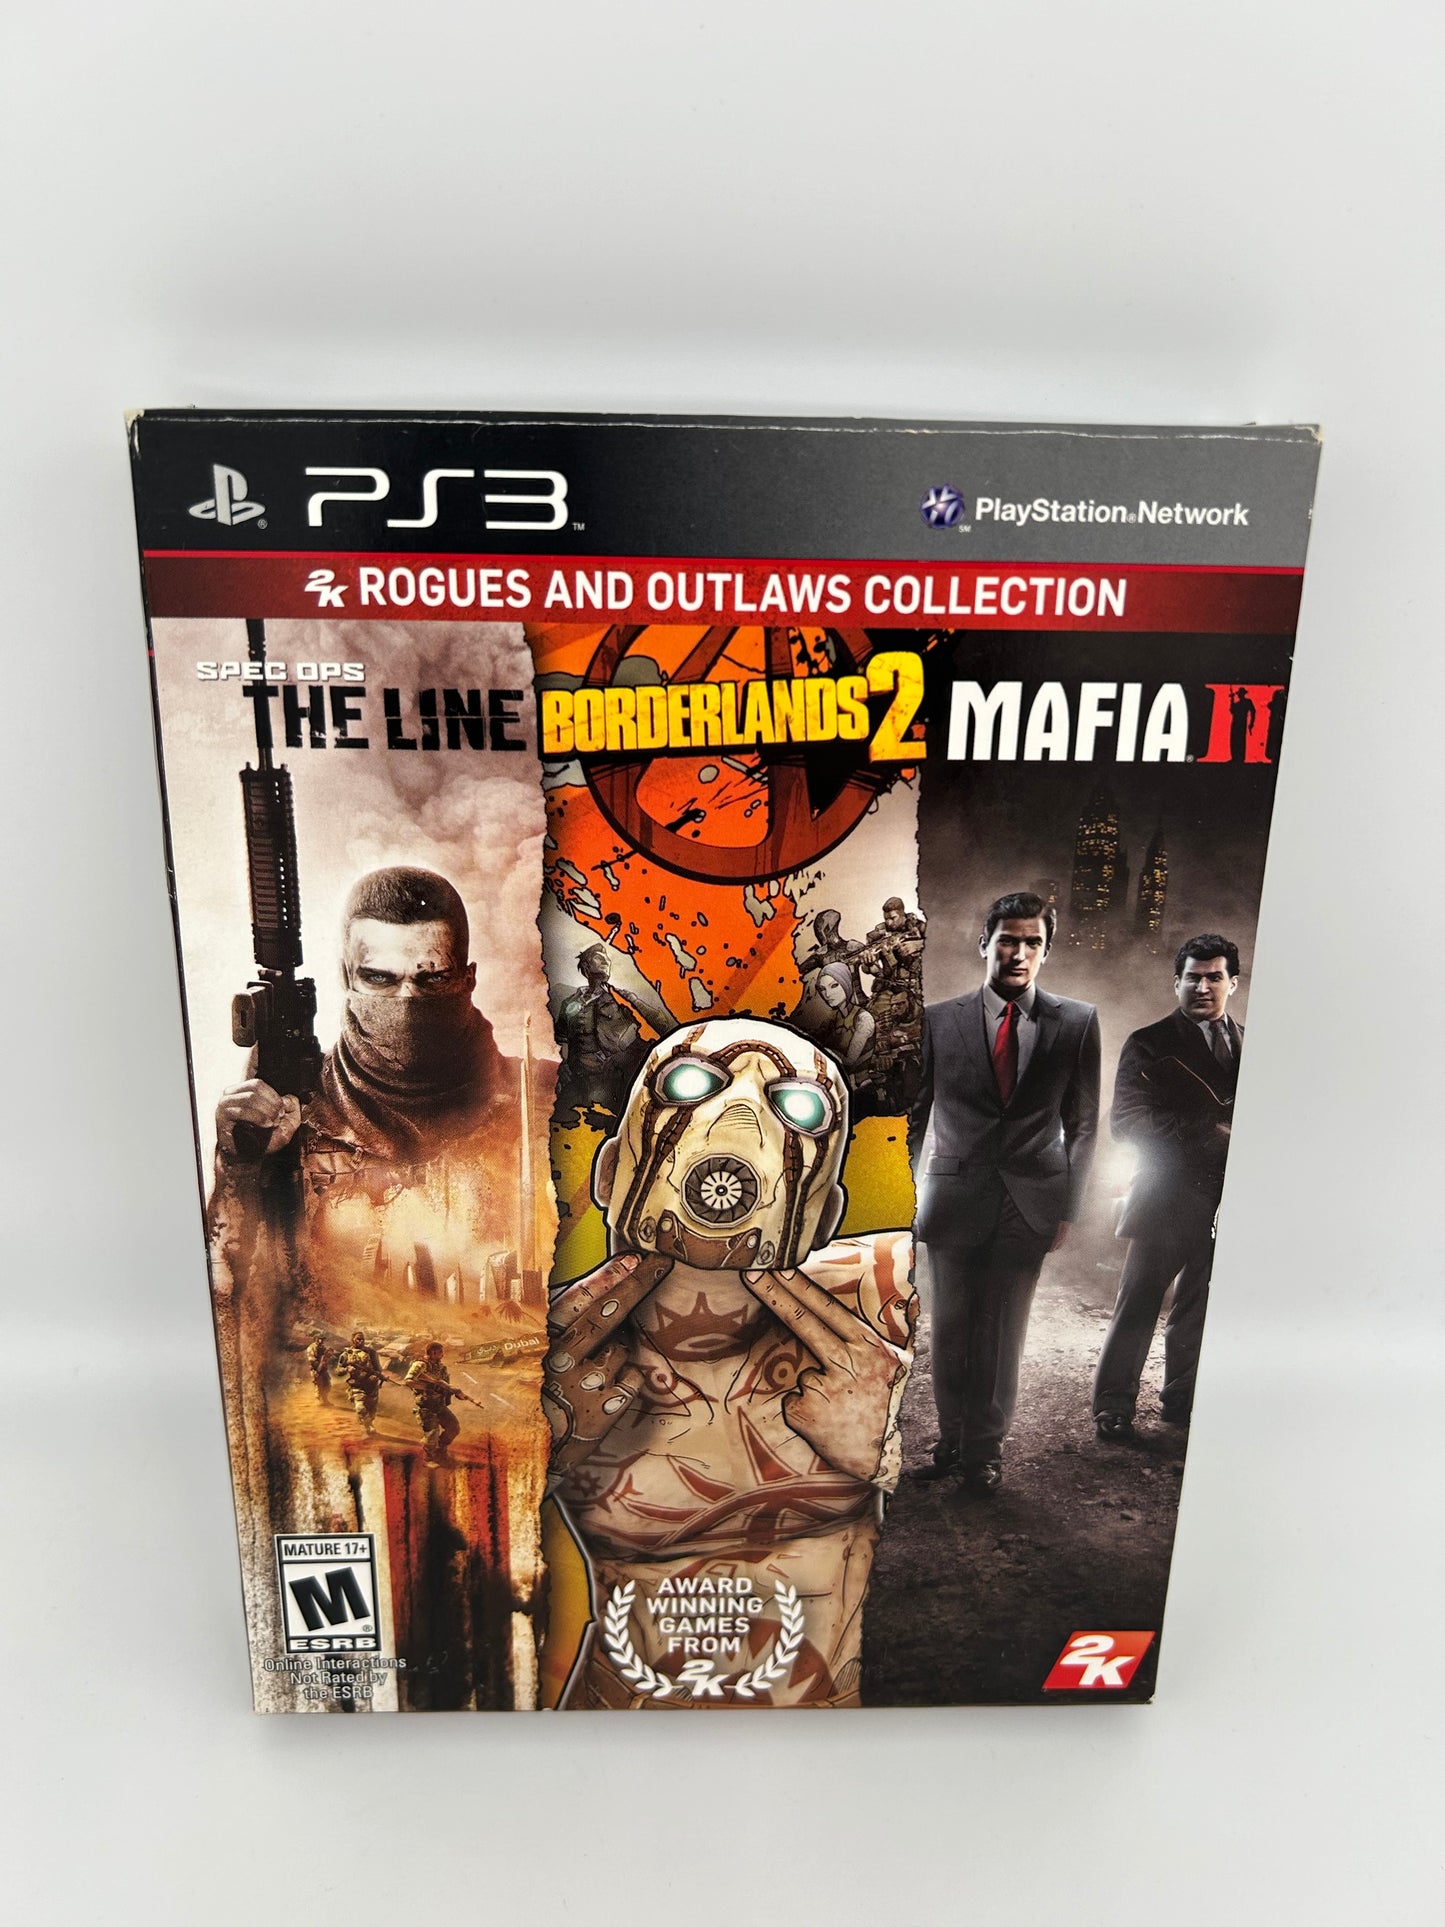 SONY PLAYSTATiON 3 [PS3] | SPEC OPS THE LiNE & BORDERLANDS 2 & MAFiA II | ROGUES AND OUTLAWS COLLECTiON